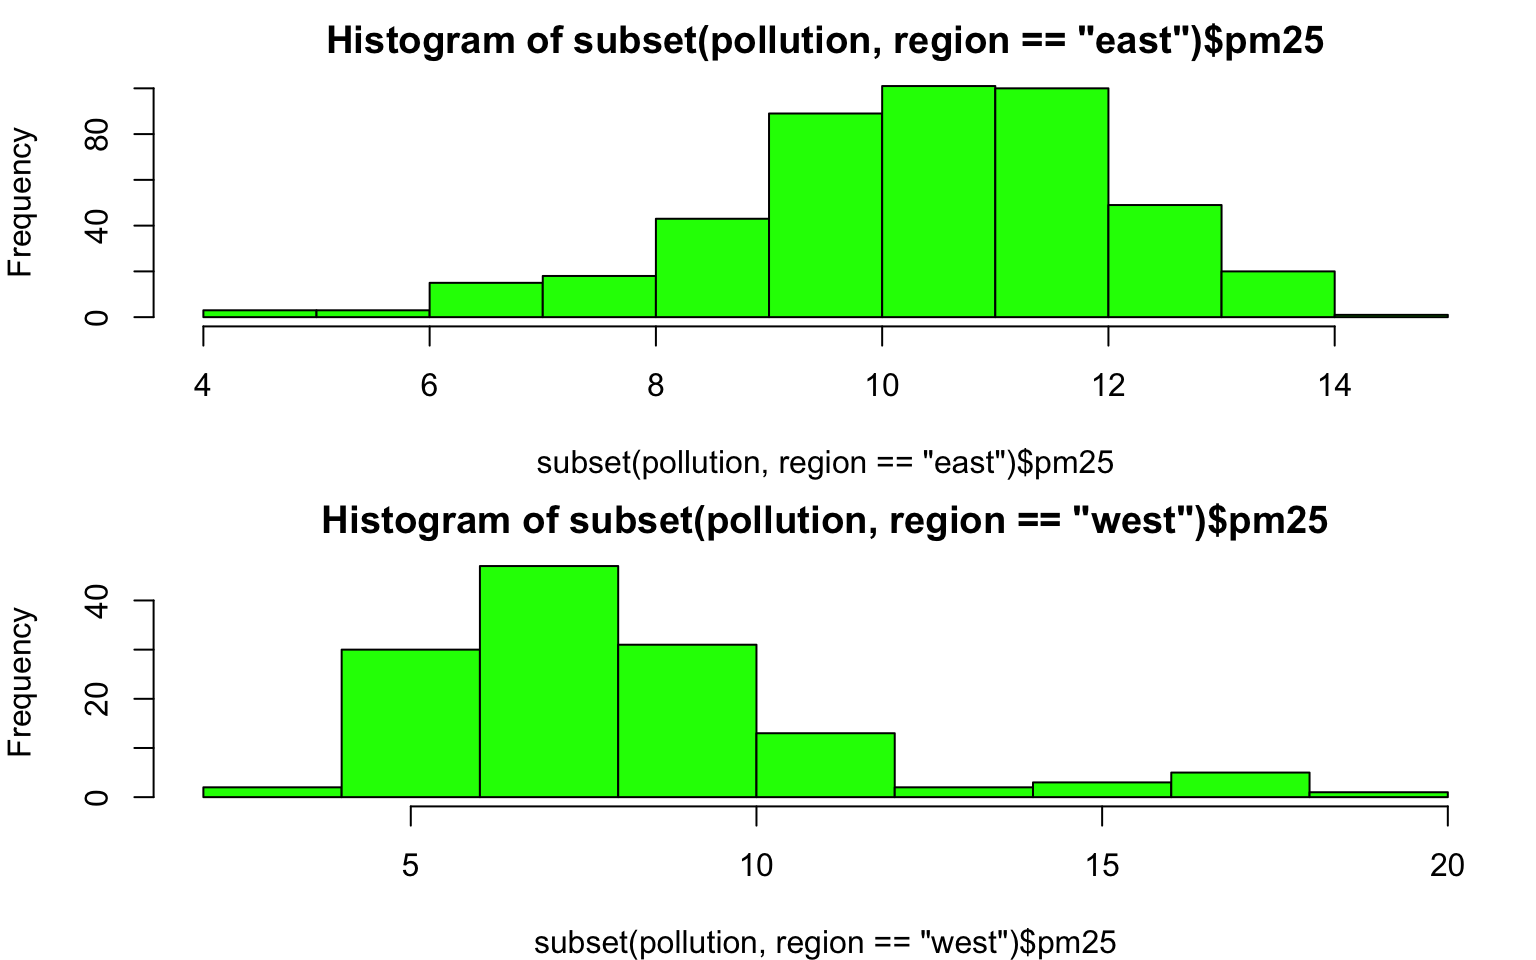 Histogram of PM2.5 by region